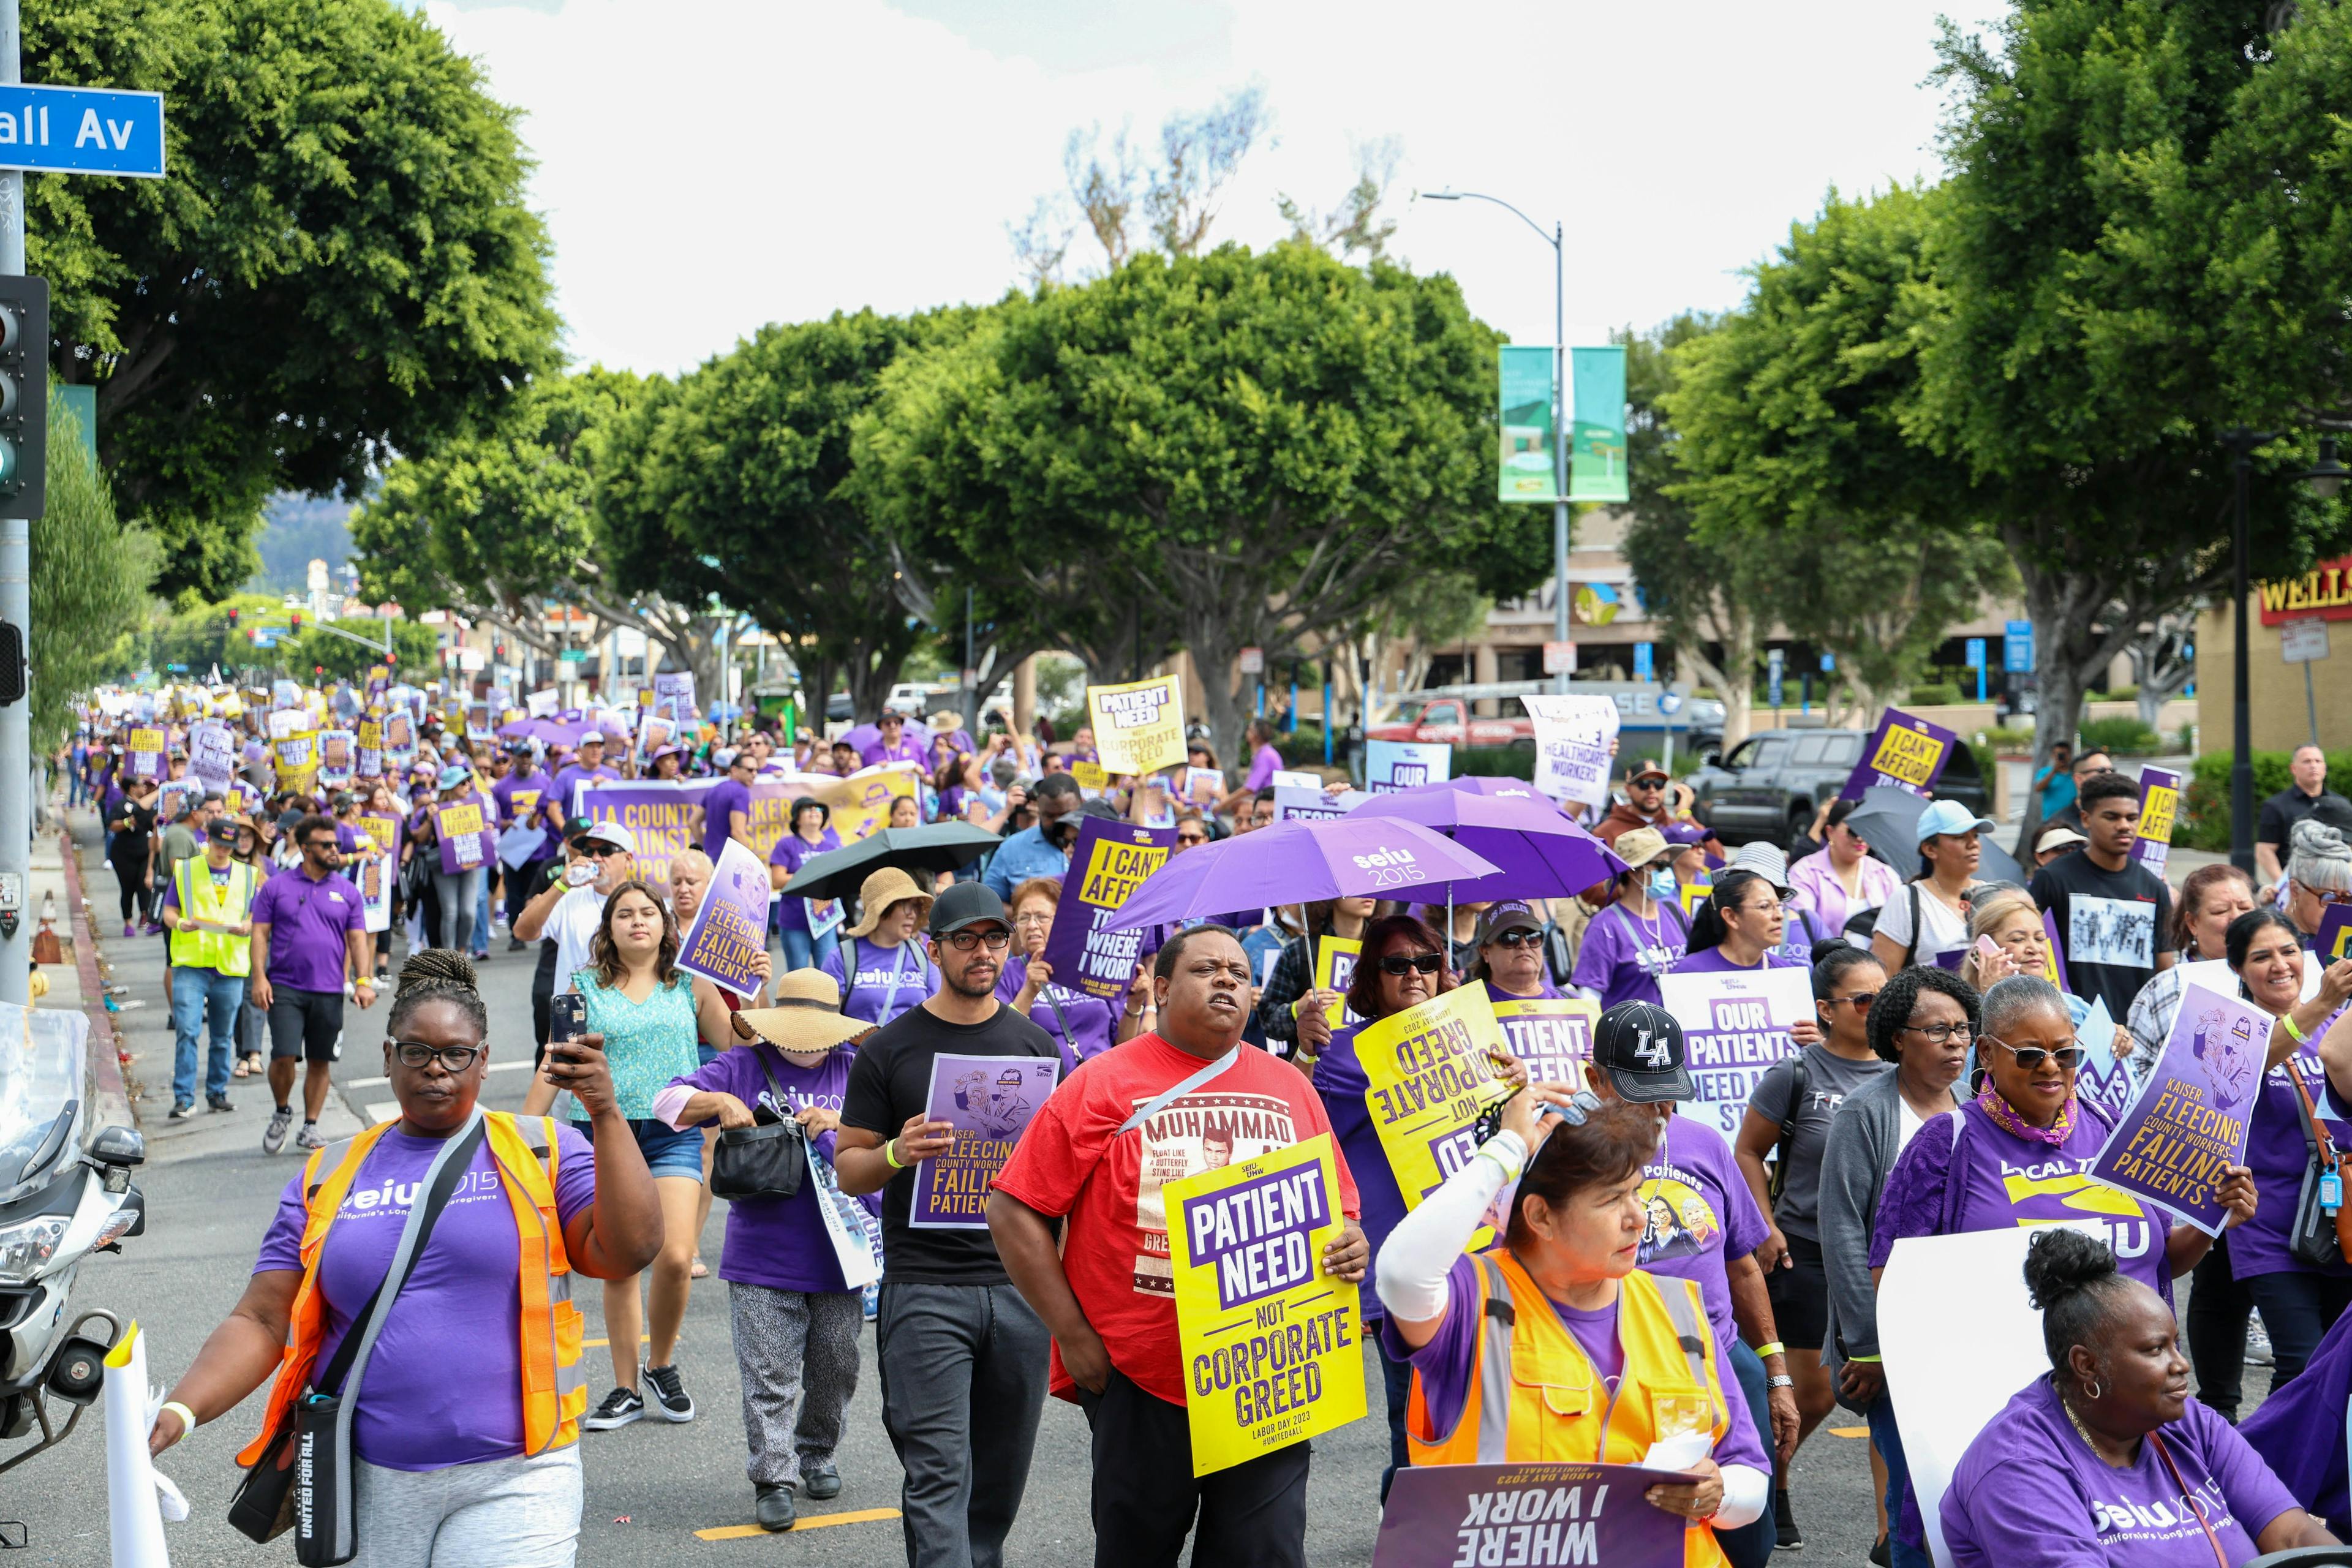 More than 75,000 Kaiser Permanente union workers went on strike last week, and the system has yet to reach a deal with labor. The two sides have been negotiating for months, and SEIU-UHW workers picketed on Labor Day, as seen in this photo. (Image credit: SEIU-UHW)